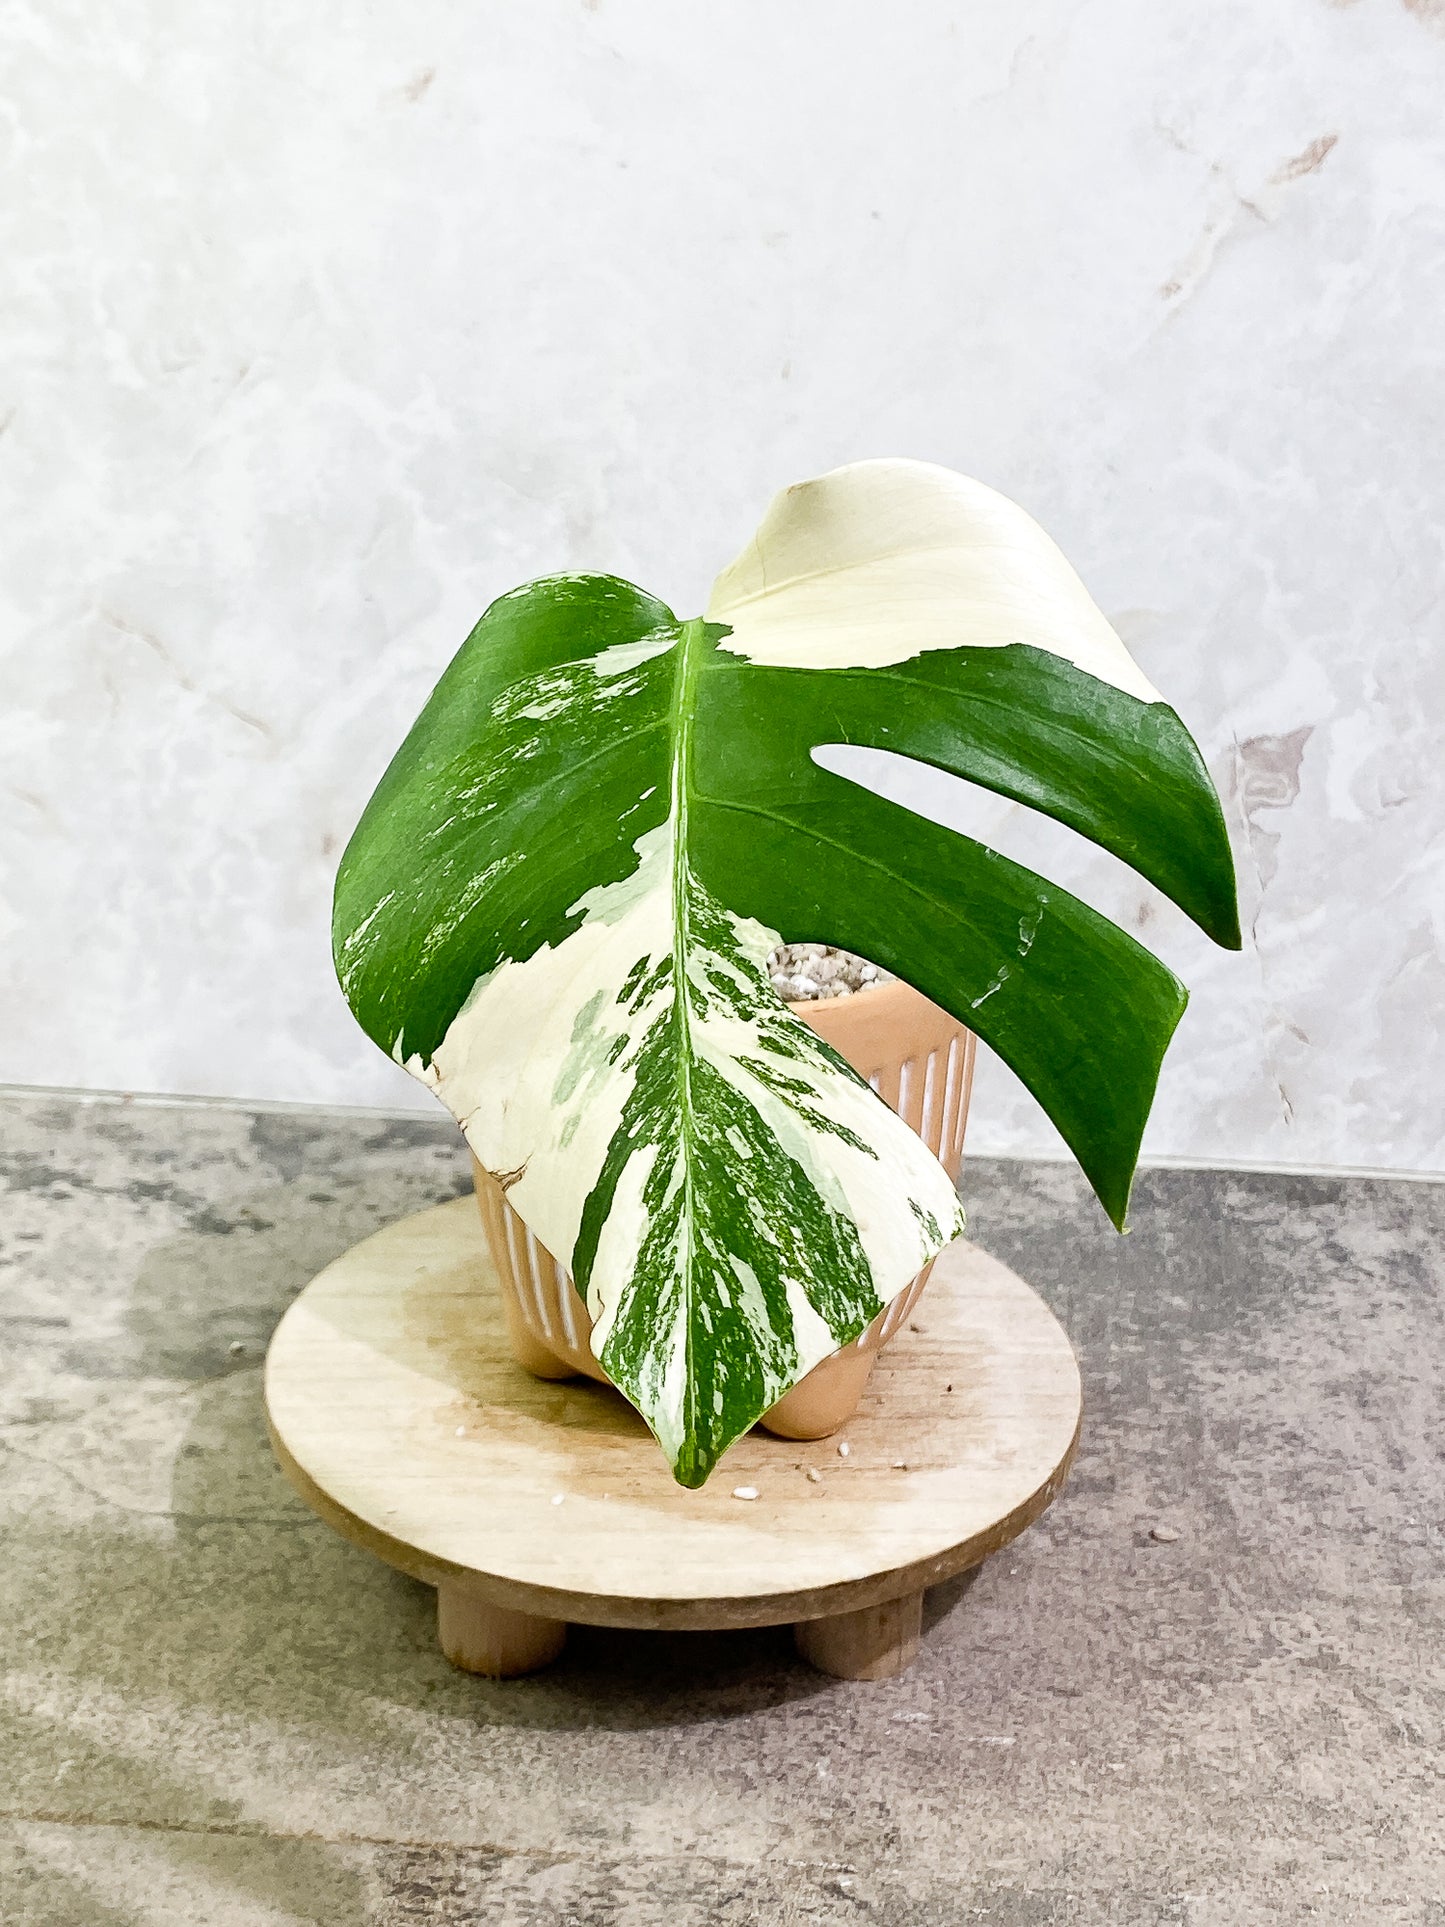 Monstera Albo Variegated 1 leaf 1 activated bud fully rooted